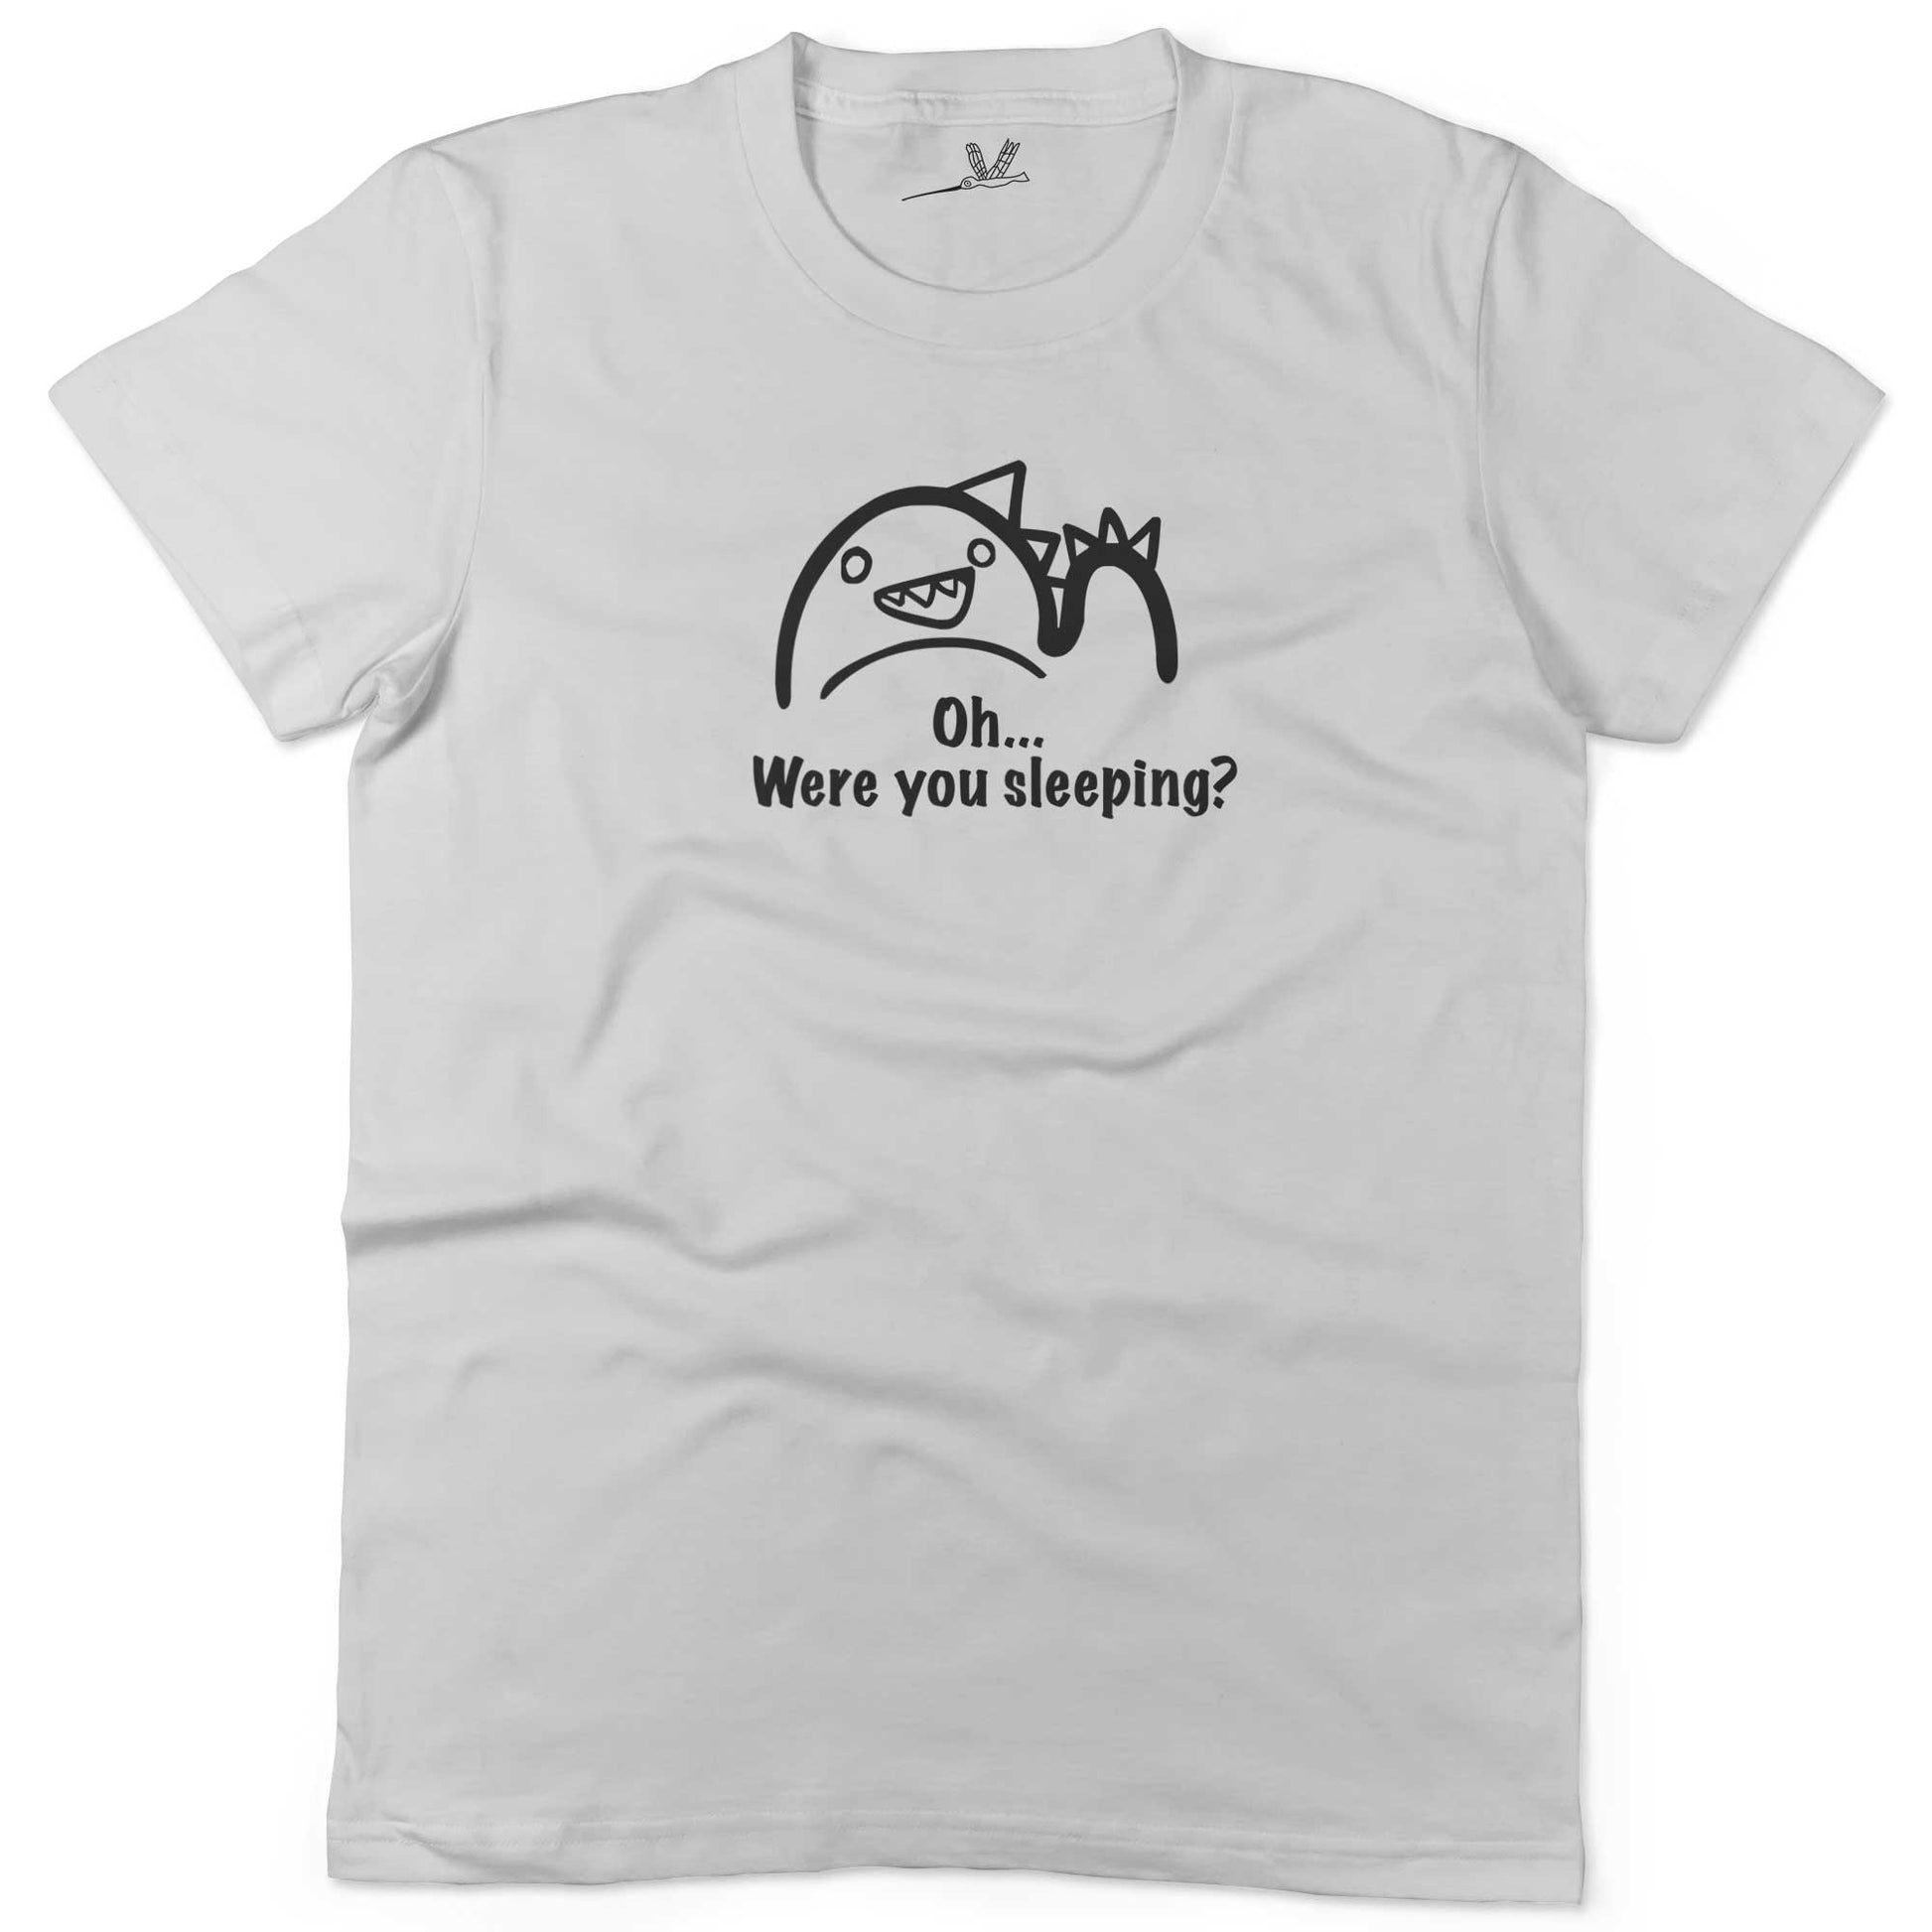 Oh...Were you sleeping? Women's or Unisex Funny T-shirt-White-Woman